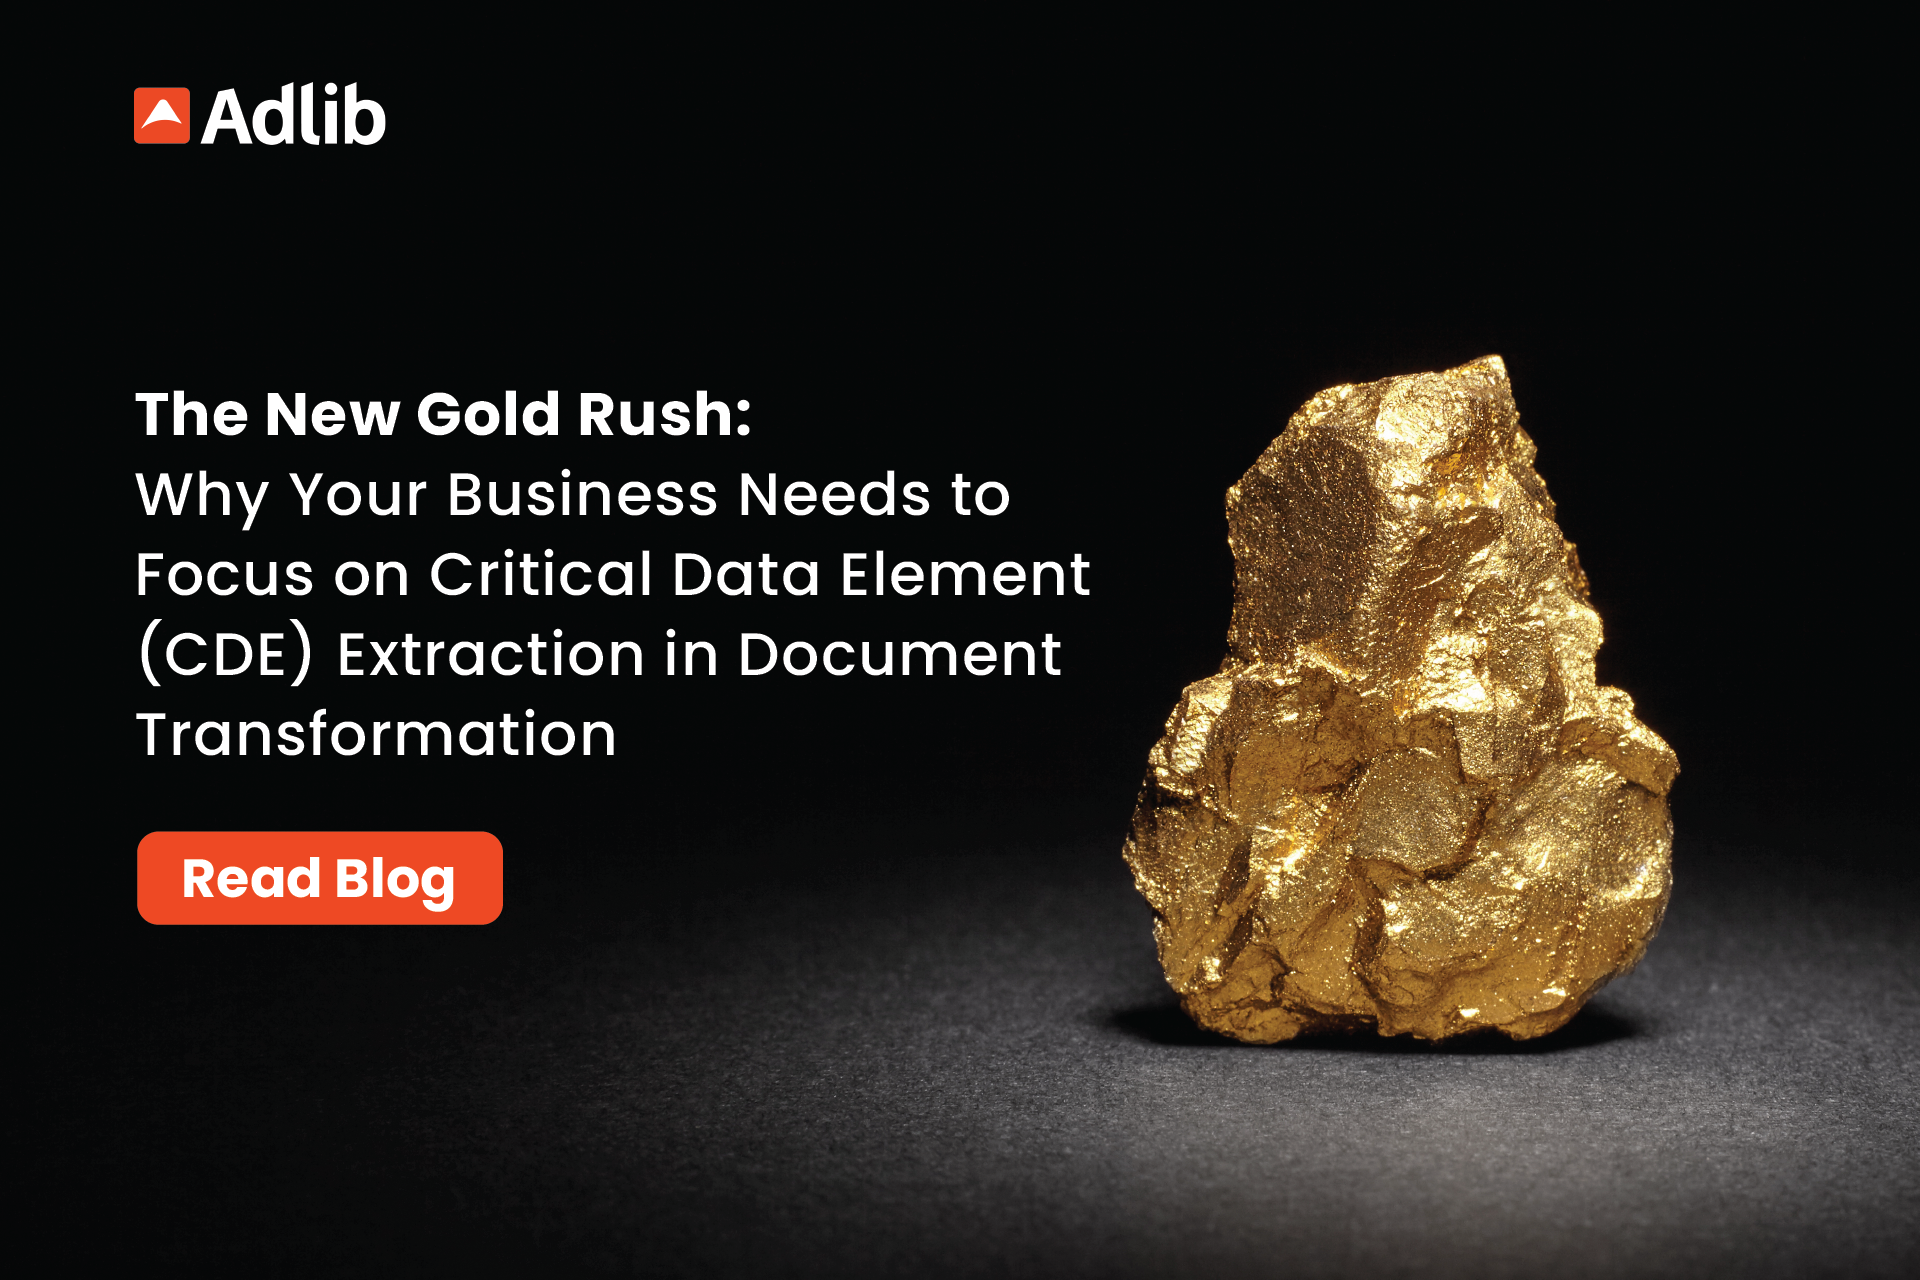 The New Gold Rush: Why Your Business Needs to Focus on Critical Data Element (CDE) Extraction From Documents Featured Image